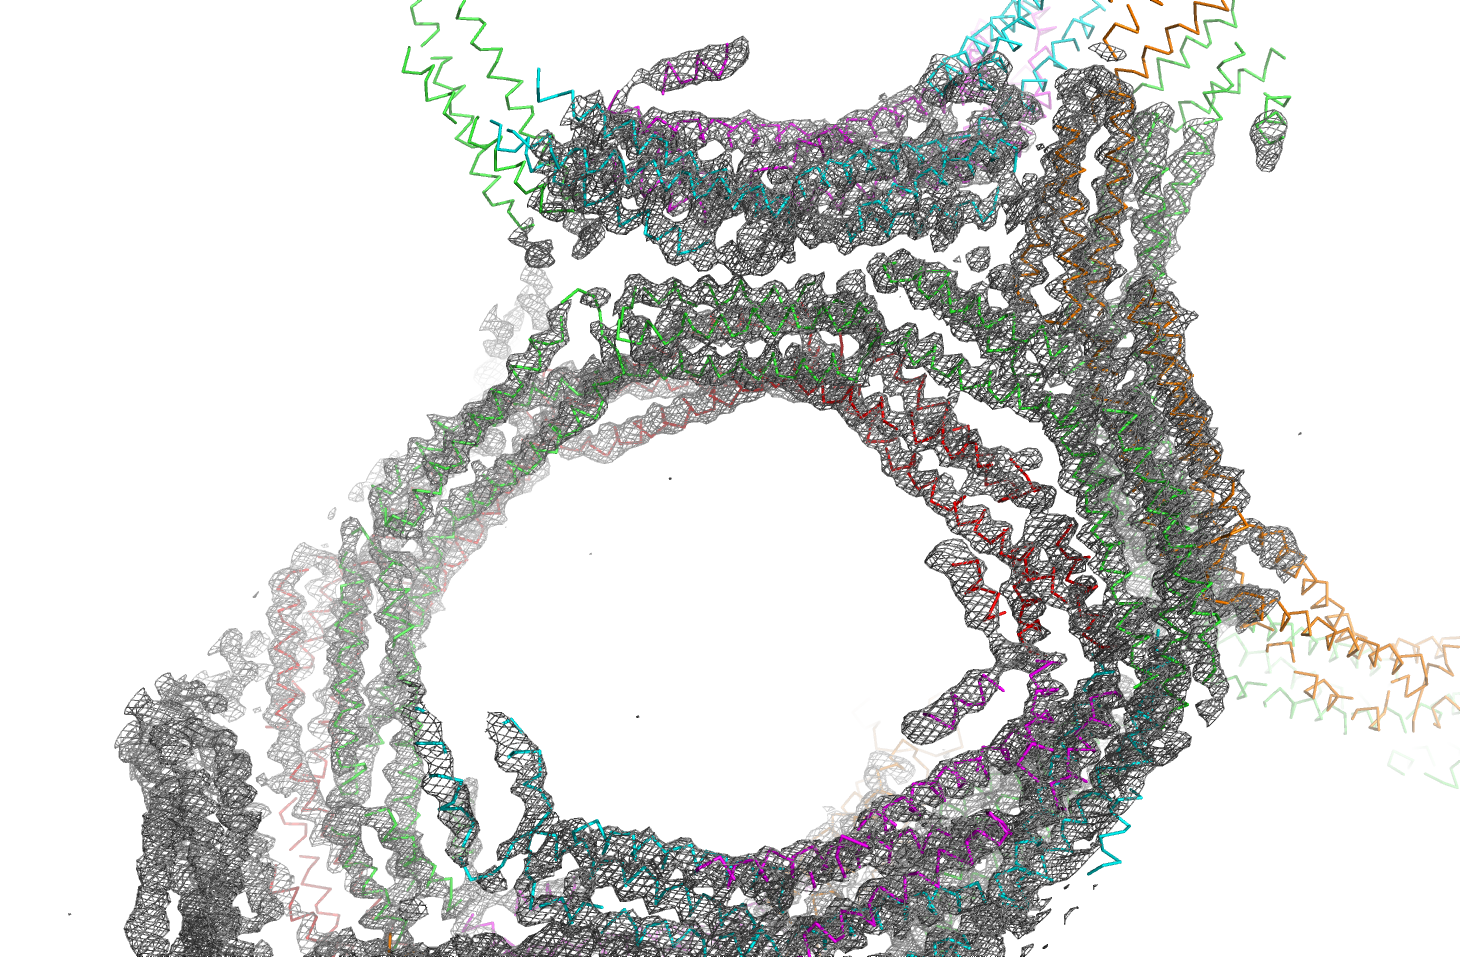 Image Structure of EzrA protein could help identify new antibiotic targets